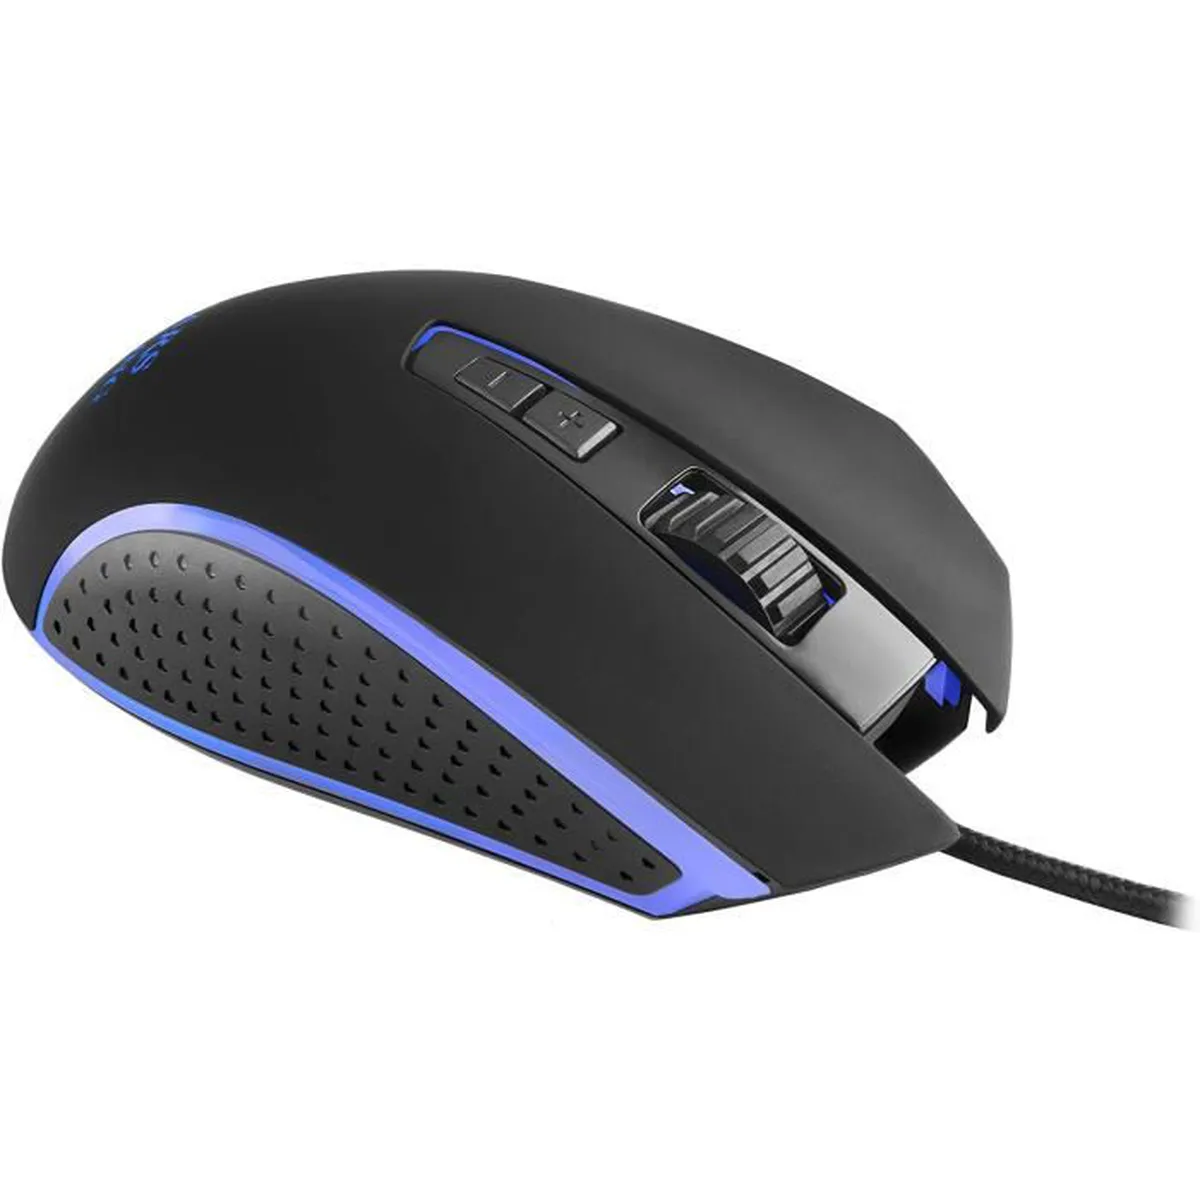 MARS GAMING MM018 MOUSE, SOFTWARE, EXTENDED BASE, RGB